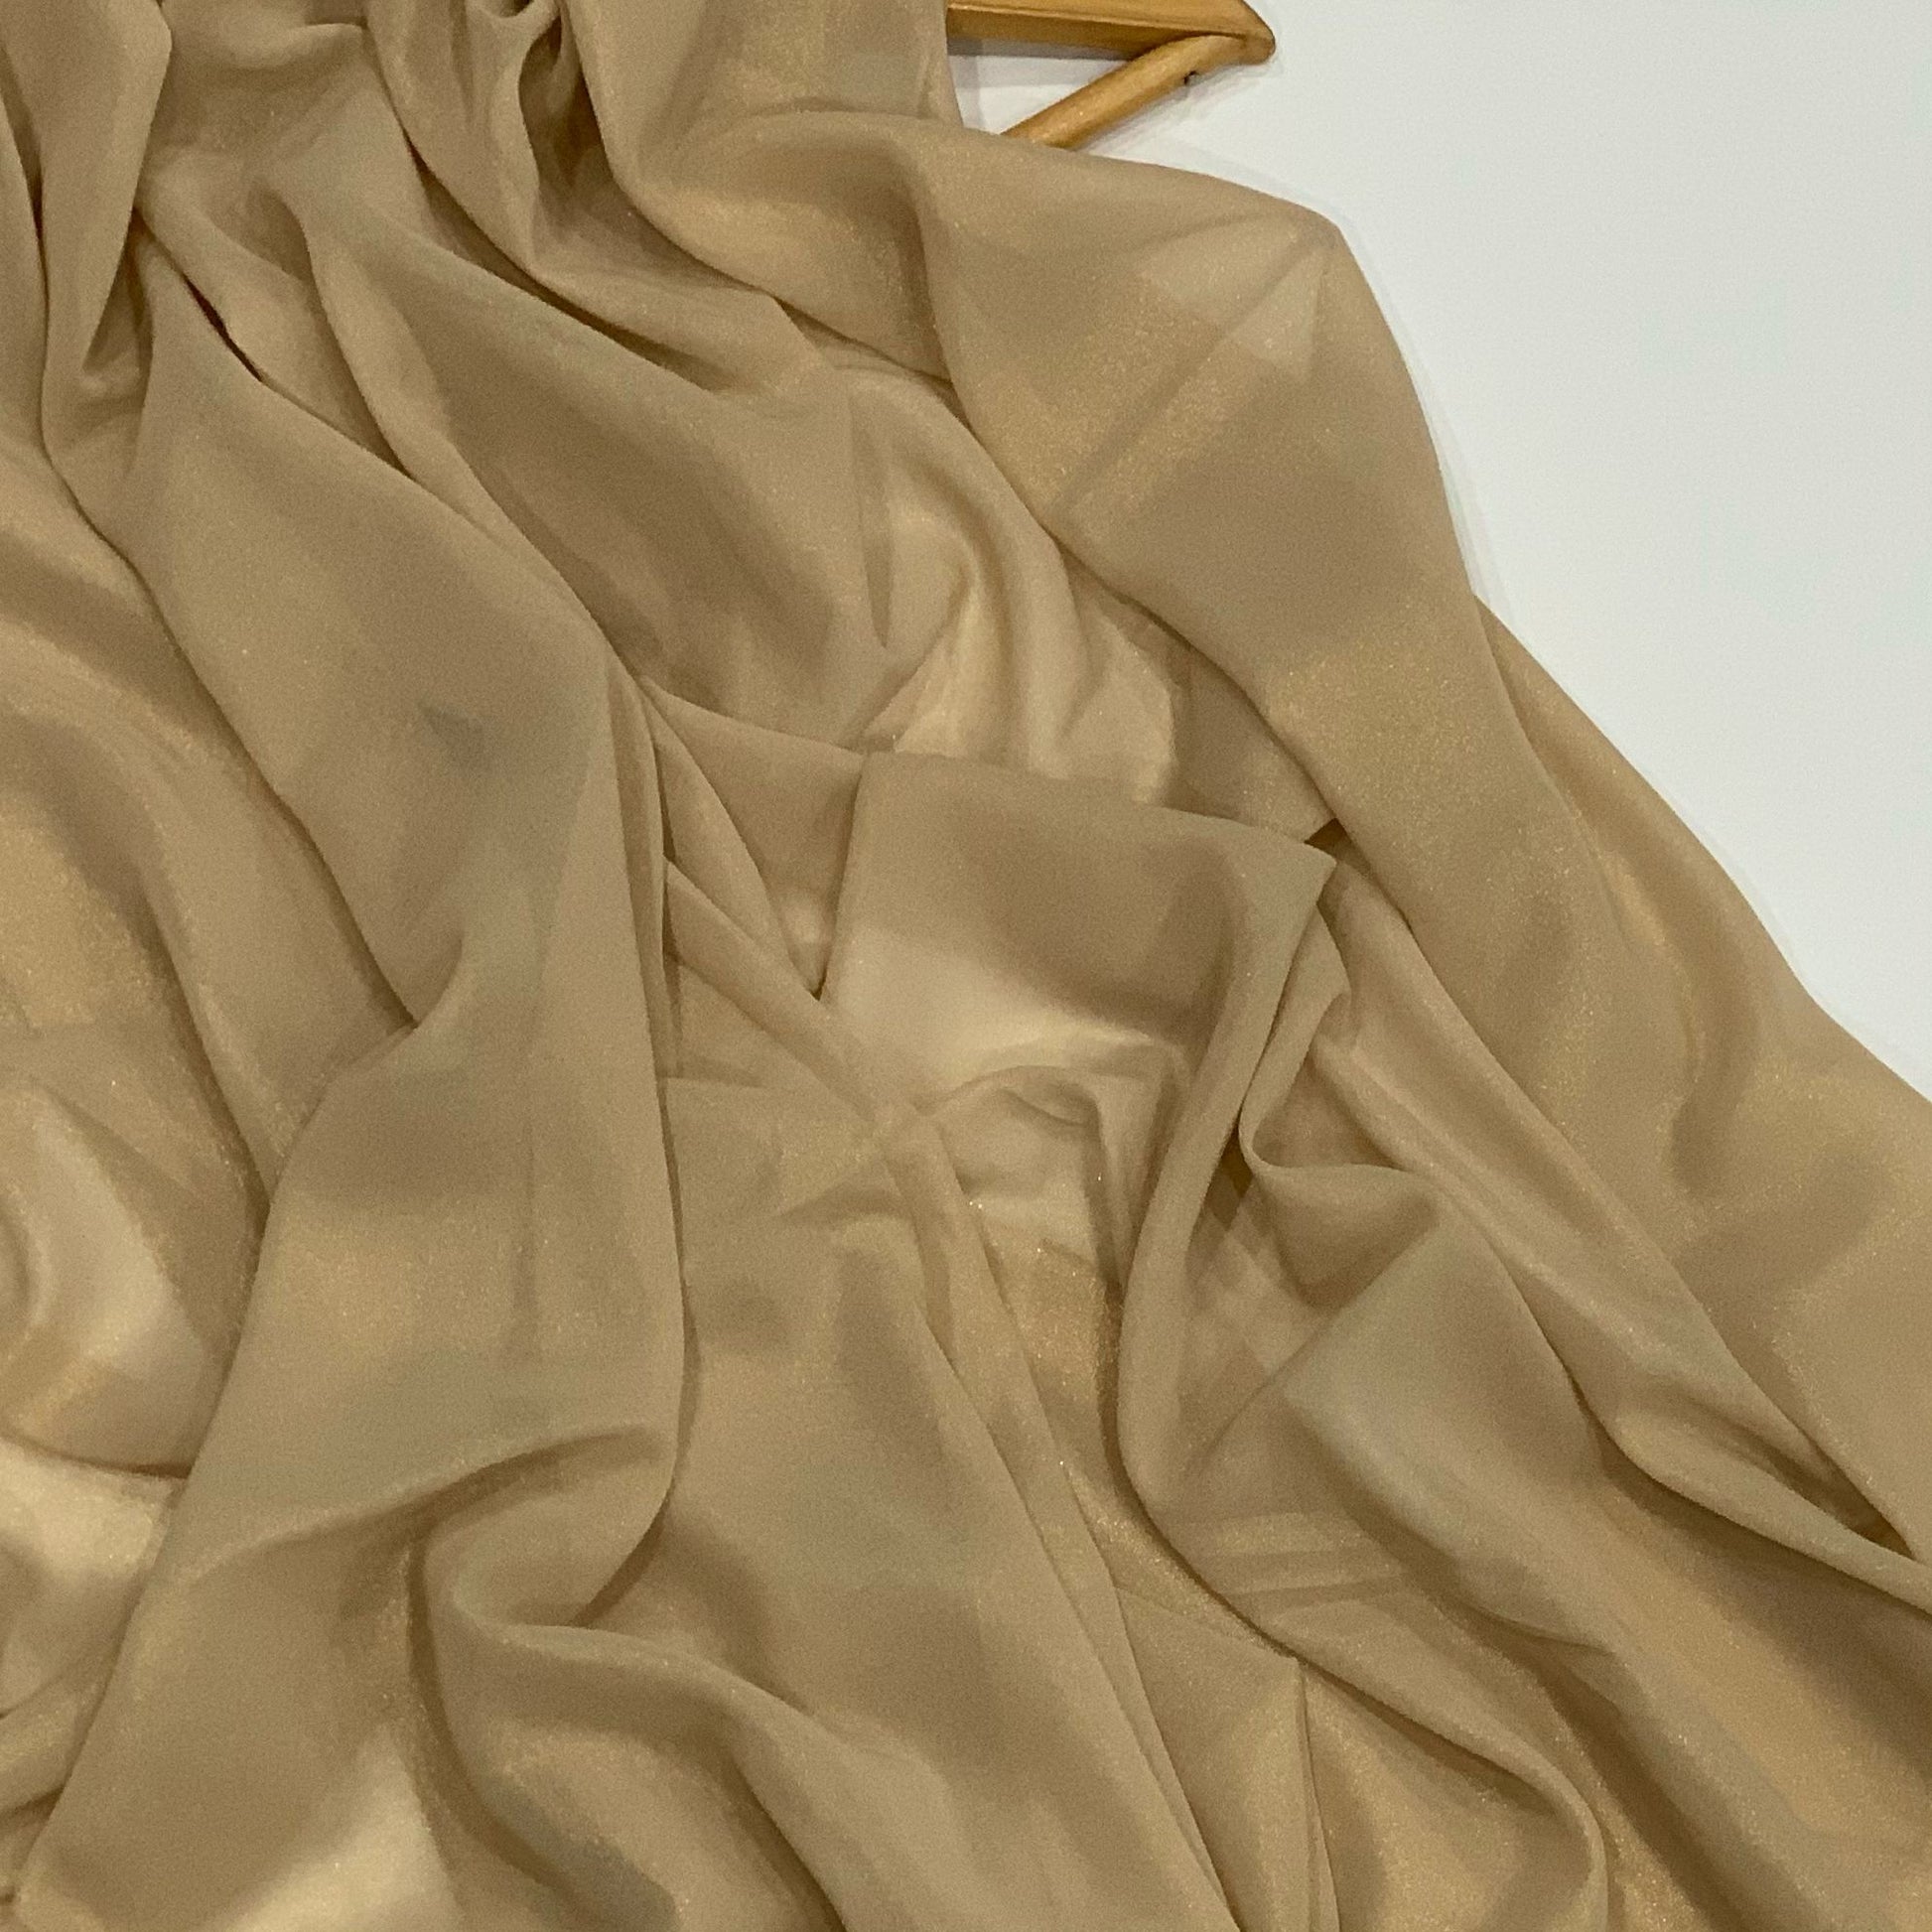 Gold Shimmer Chiffon Hijab  https://www.arifasboutique.com/products/gold-shimmer-chiffon-hijab  Shimmer Chiffon Hijabs are the perfect balance of style and shine. The perfect piece to compliment your outfit for any occasion Material: 100% Polyester&nbsp; Size: 180 cm x 70 cm Color may look different due to different screen resolution&nbsp;